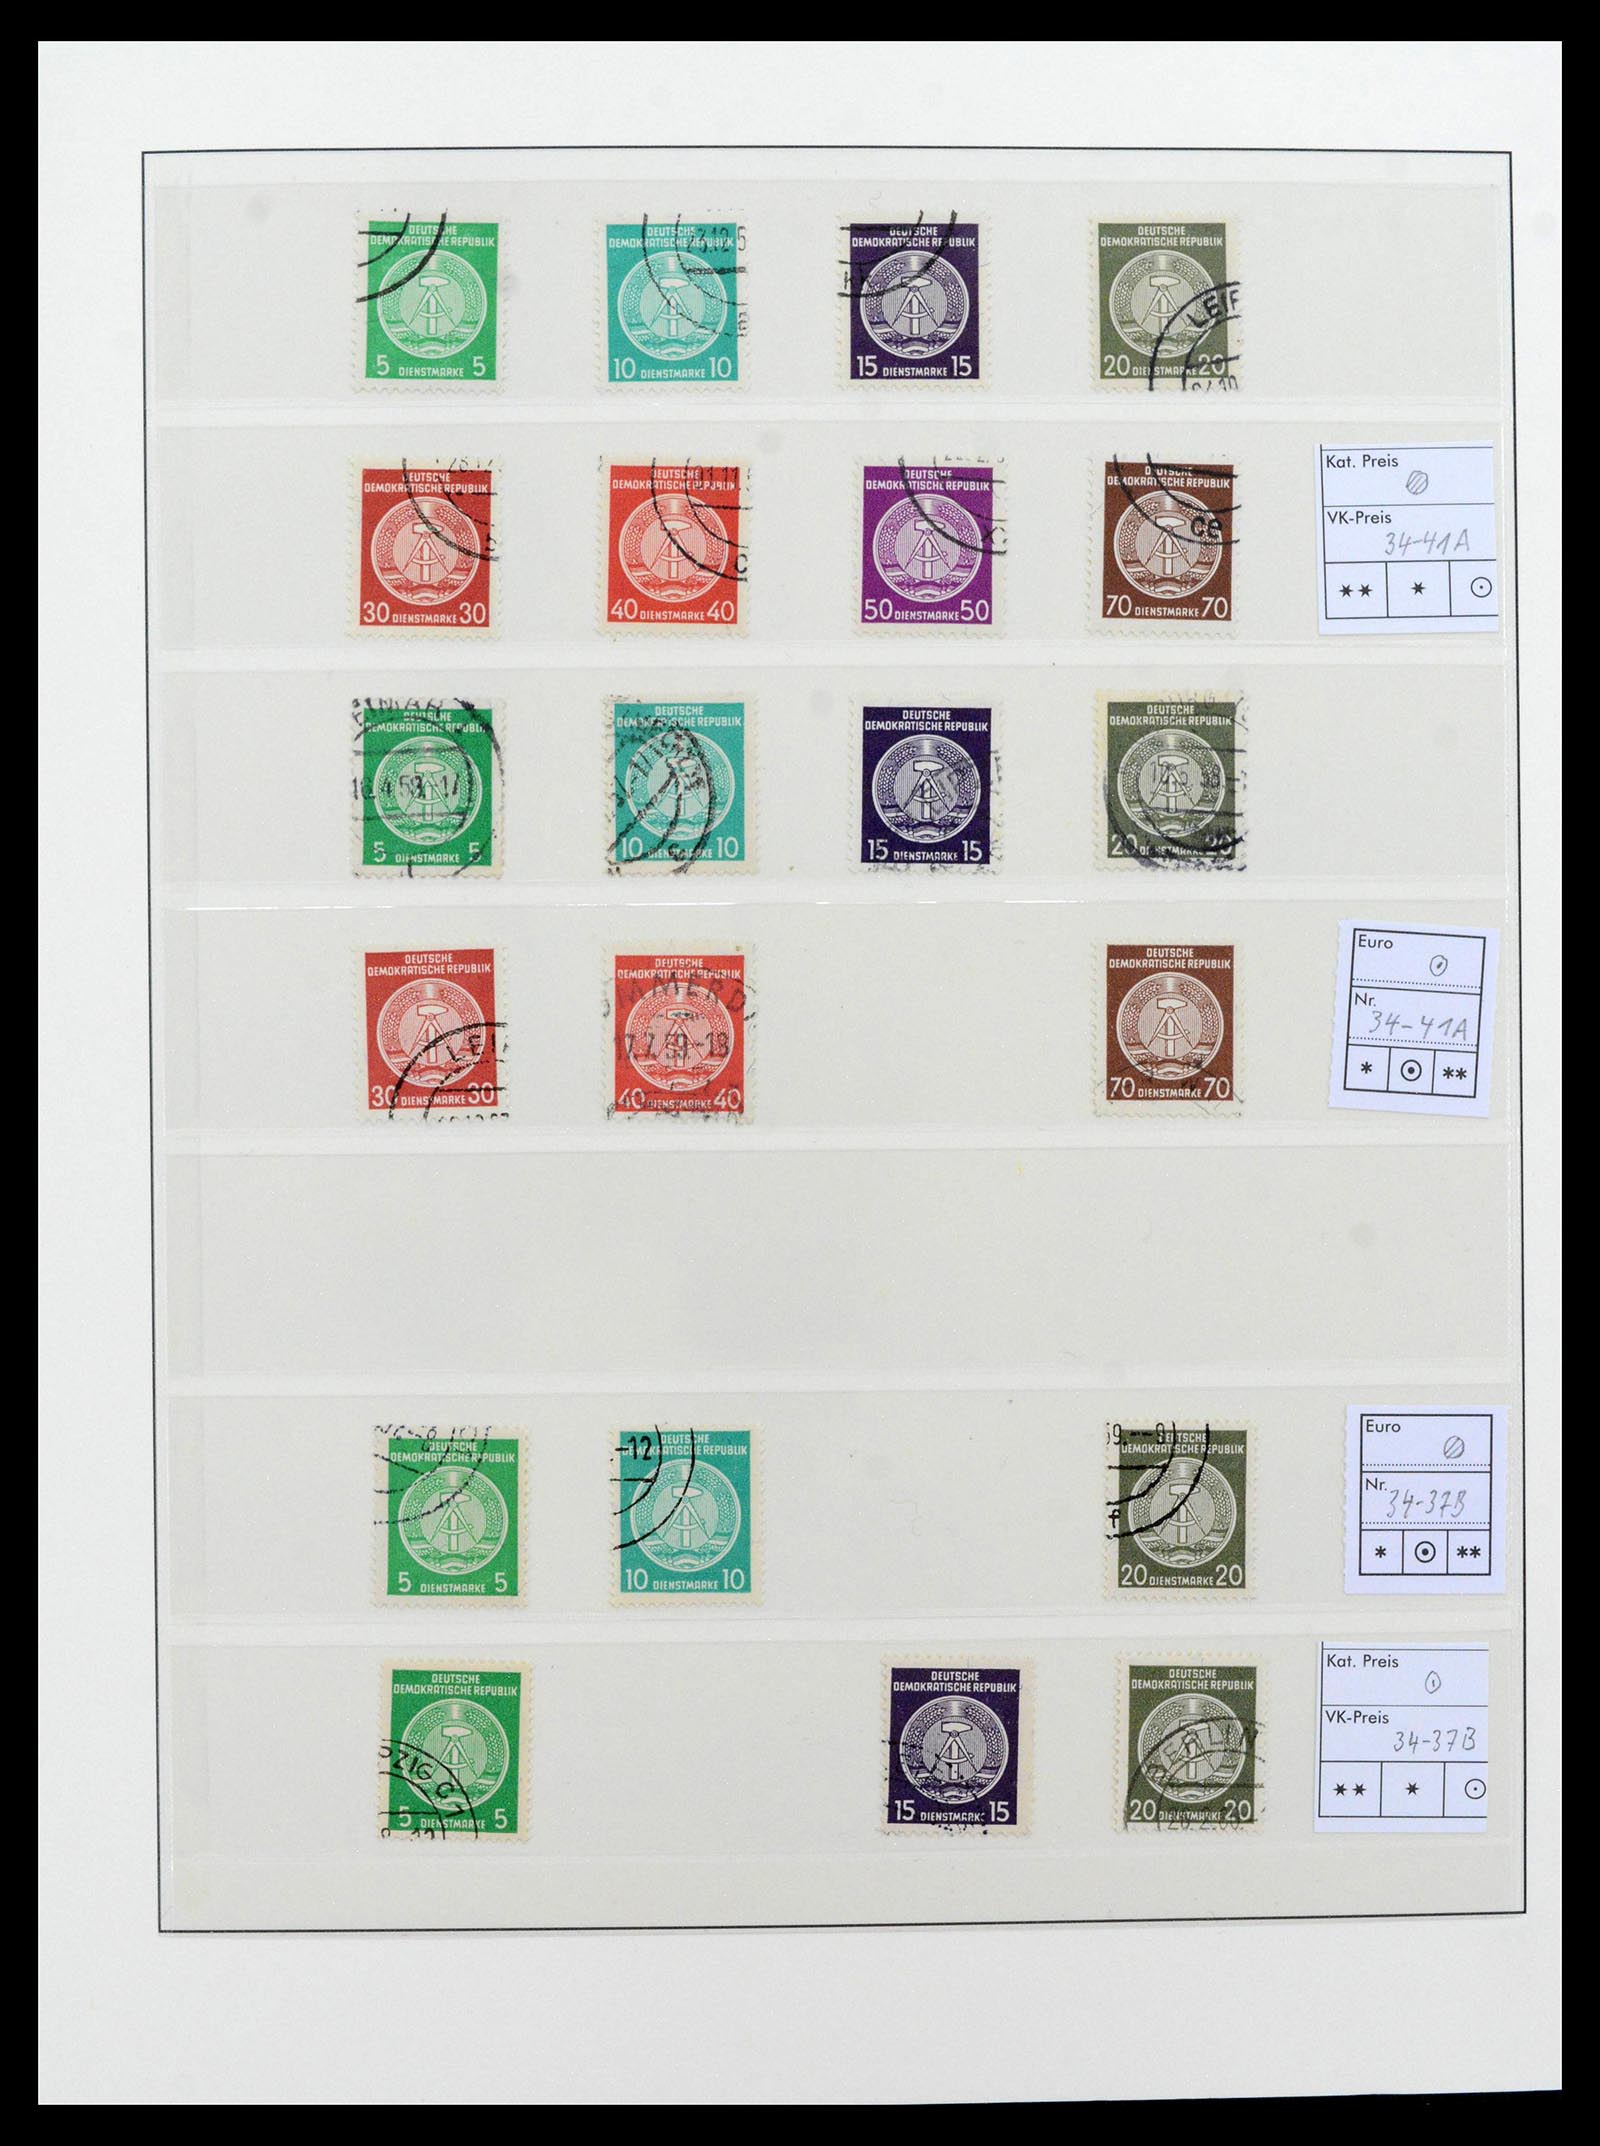 39376 0026 - Stamp collection 39376 GDR service stamps 1951-1965.